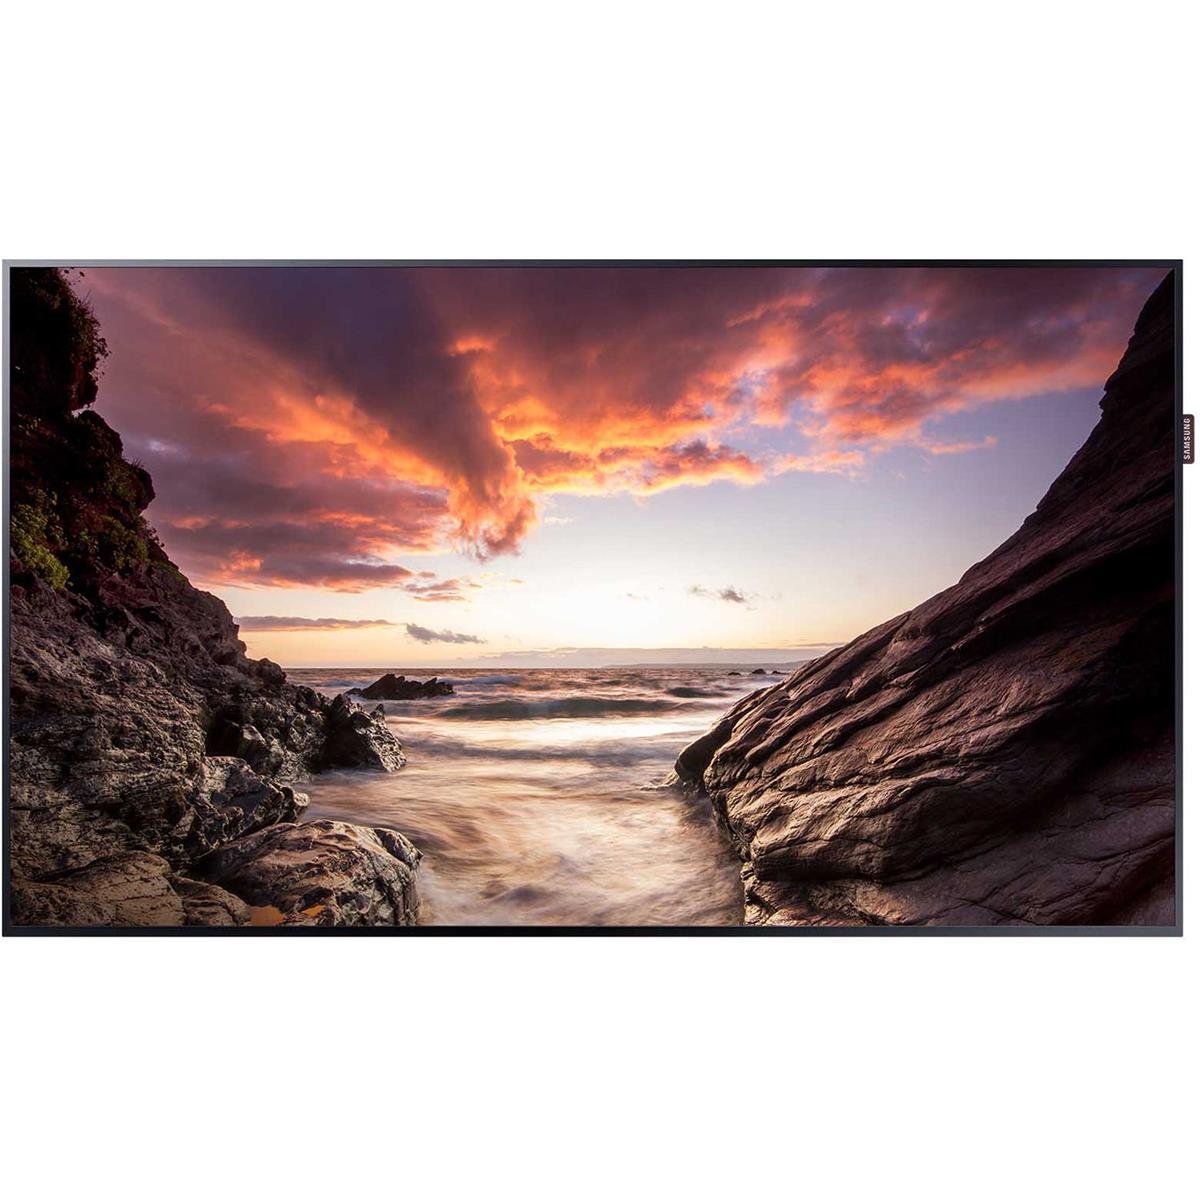 55" Class Full HD Smart LED Commercial Display, 1920x1080 - Samsung PH55F-P